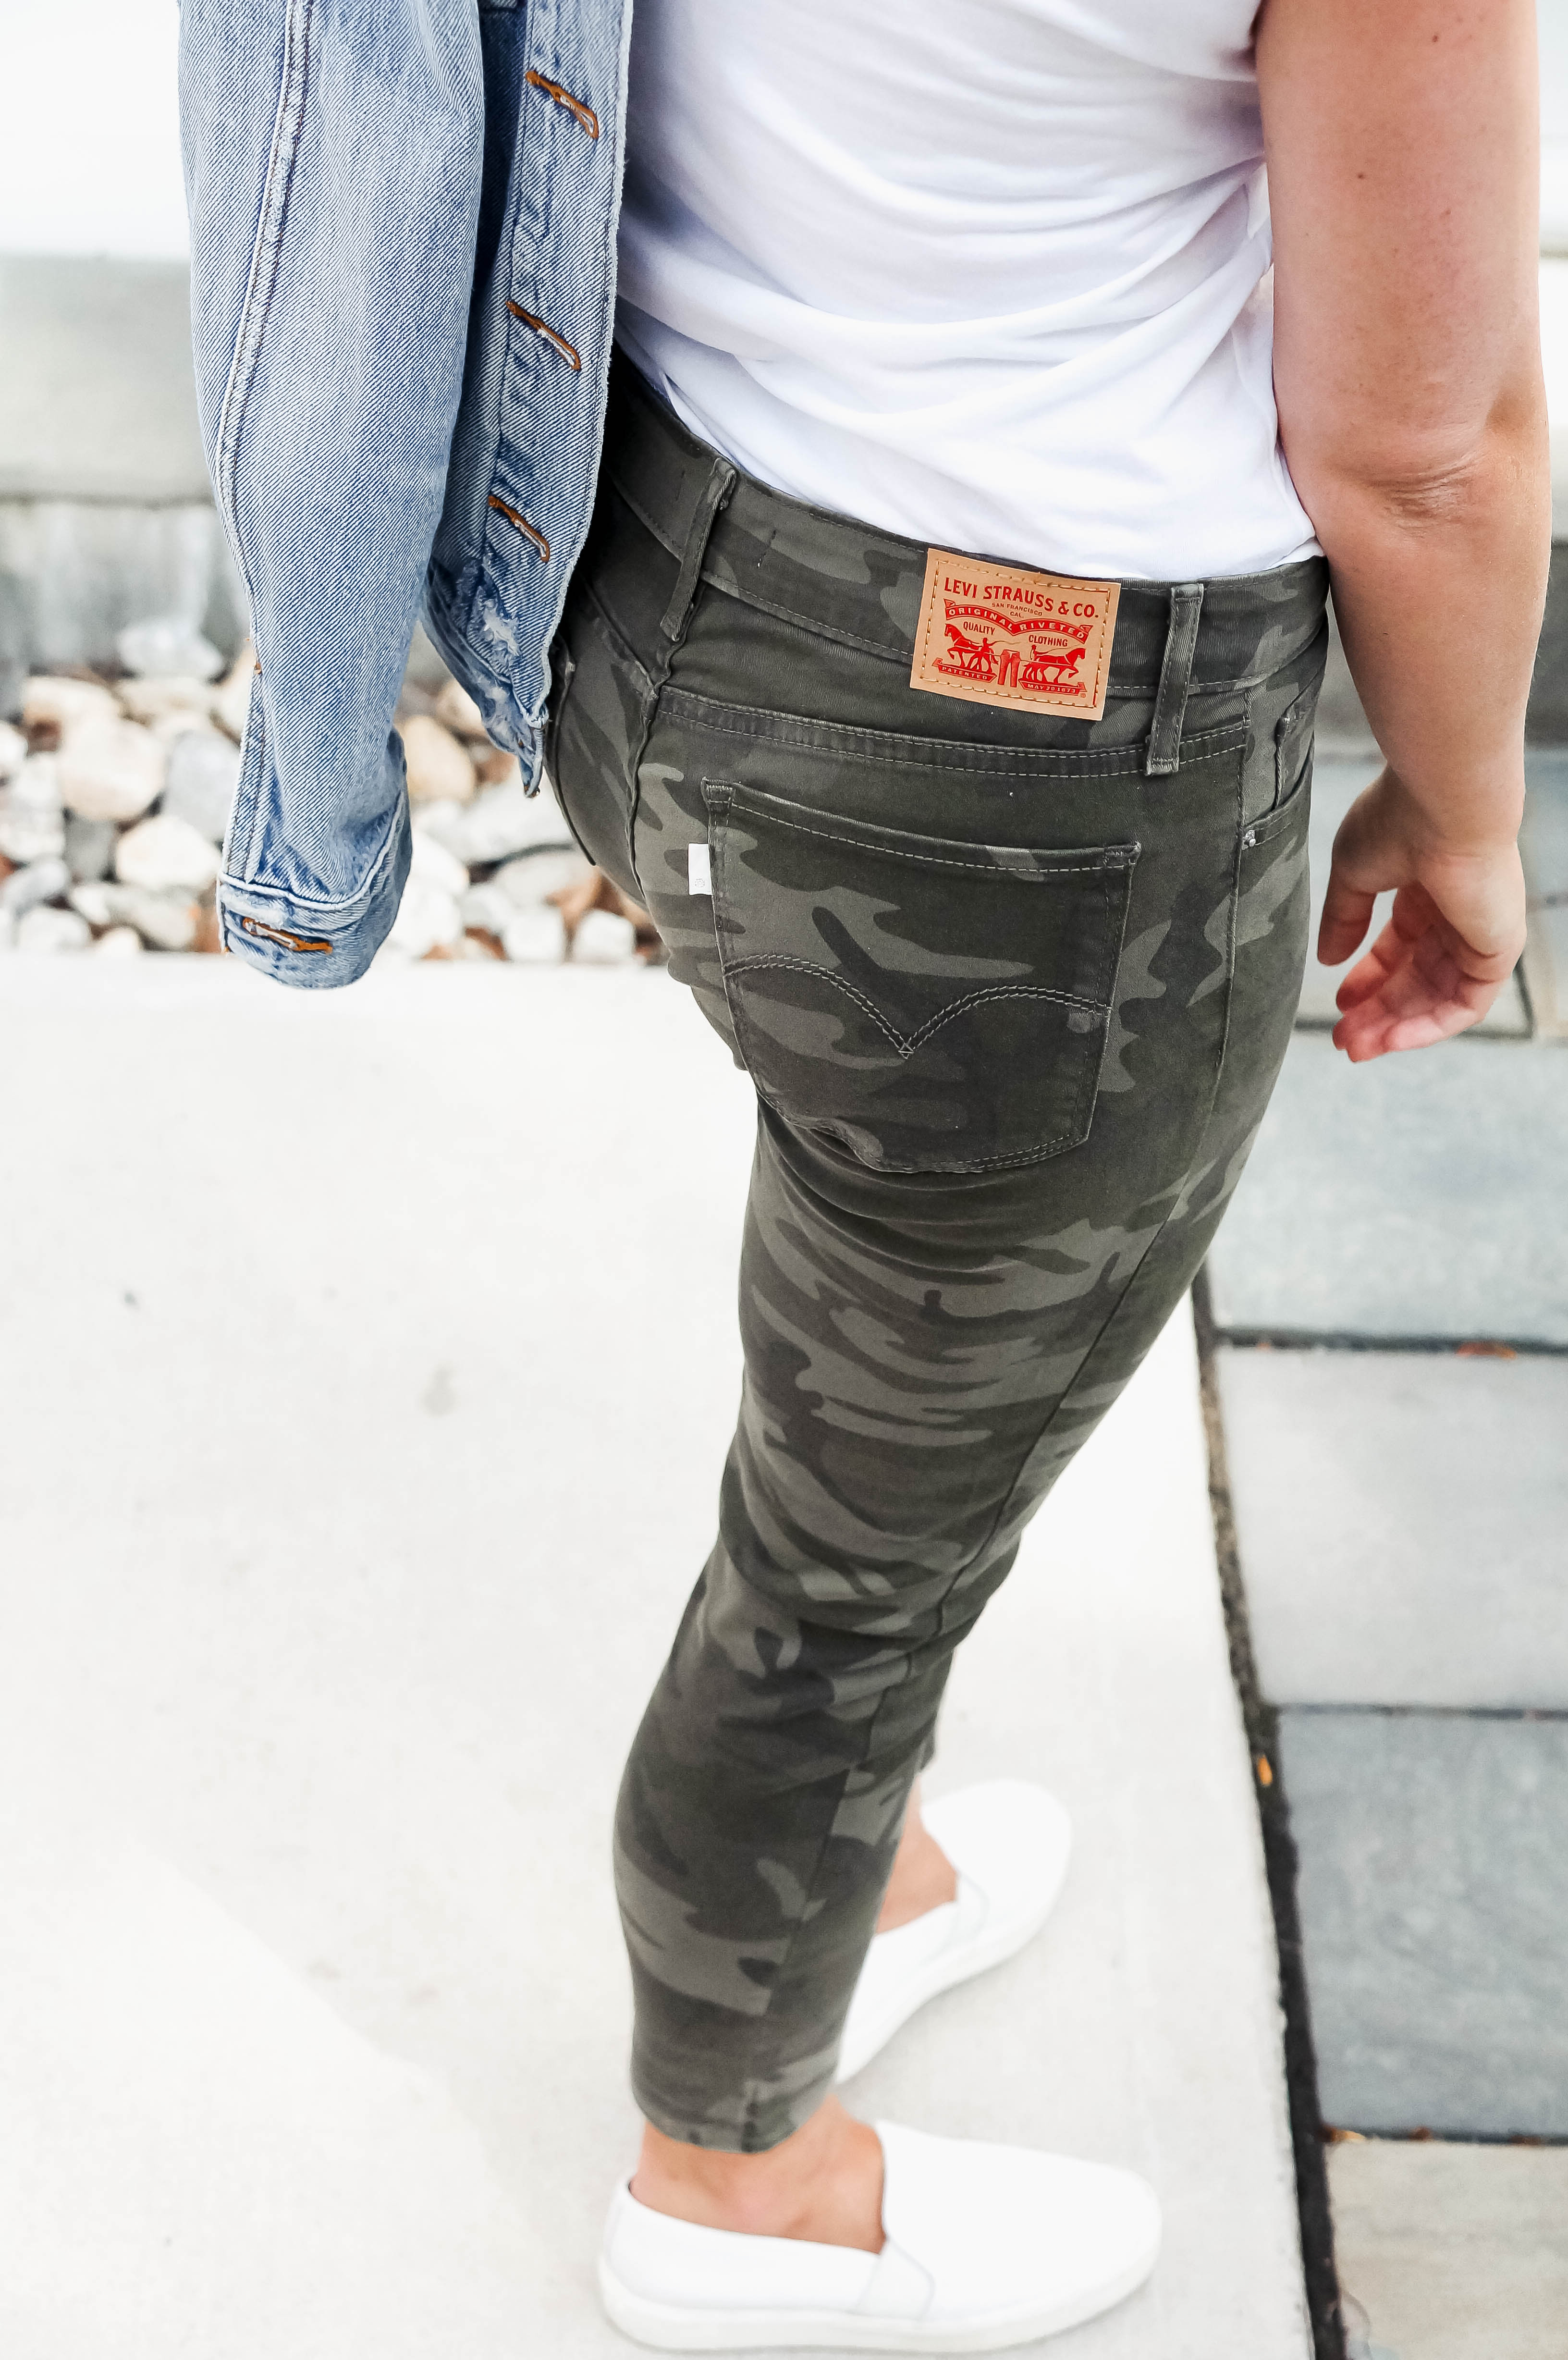 Everyday Trends For Fall With Levi's Camo Jeans